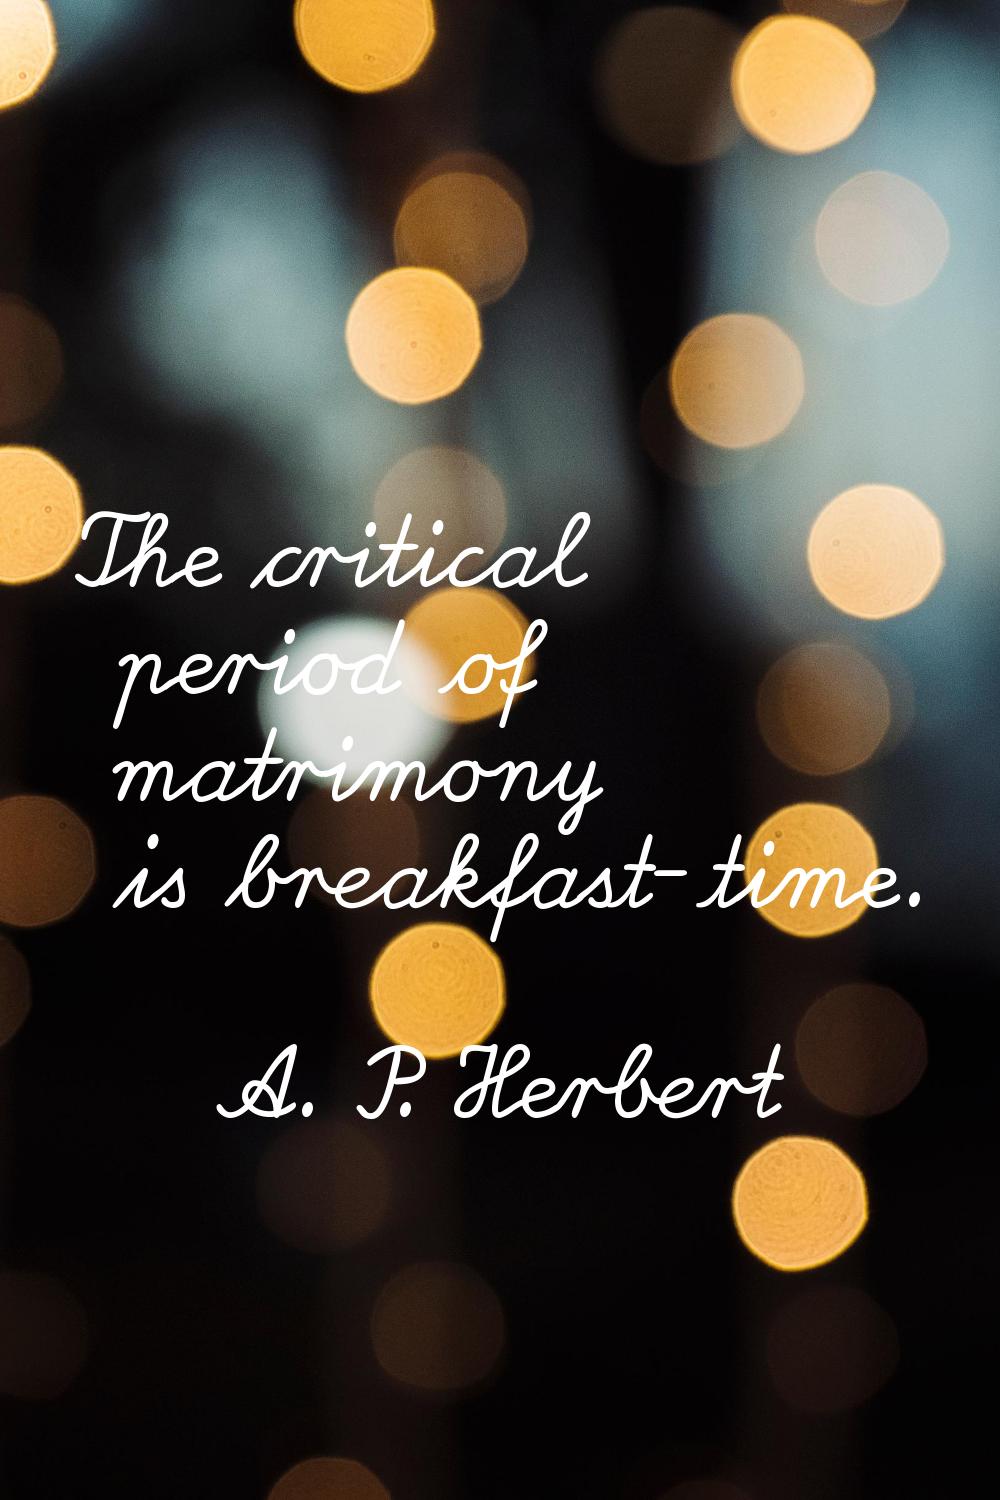 The critical period of matrimony is breakfast-time.